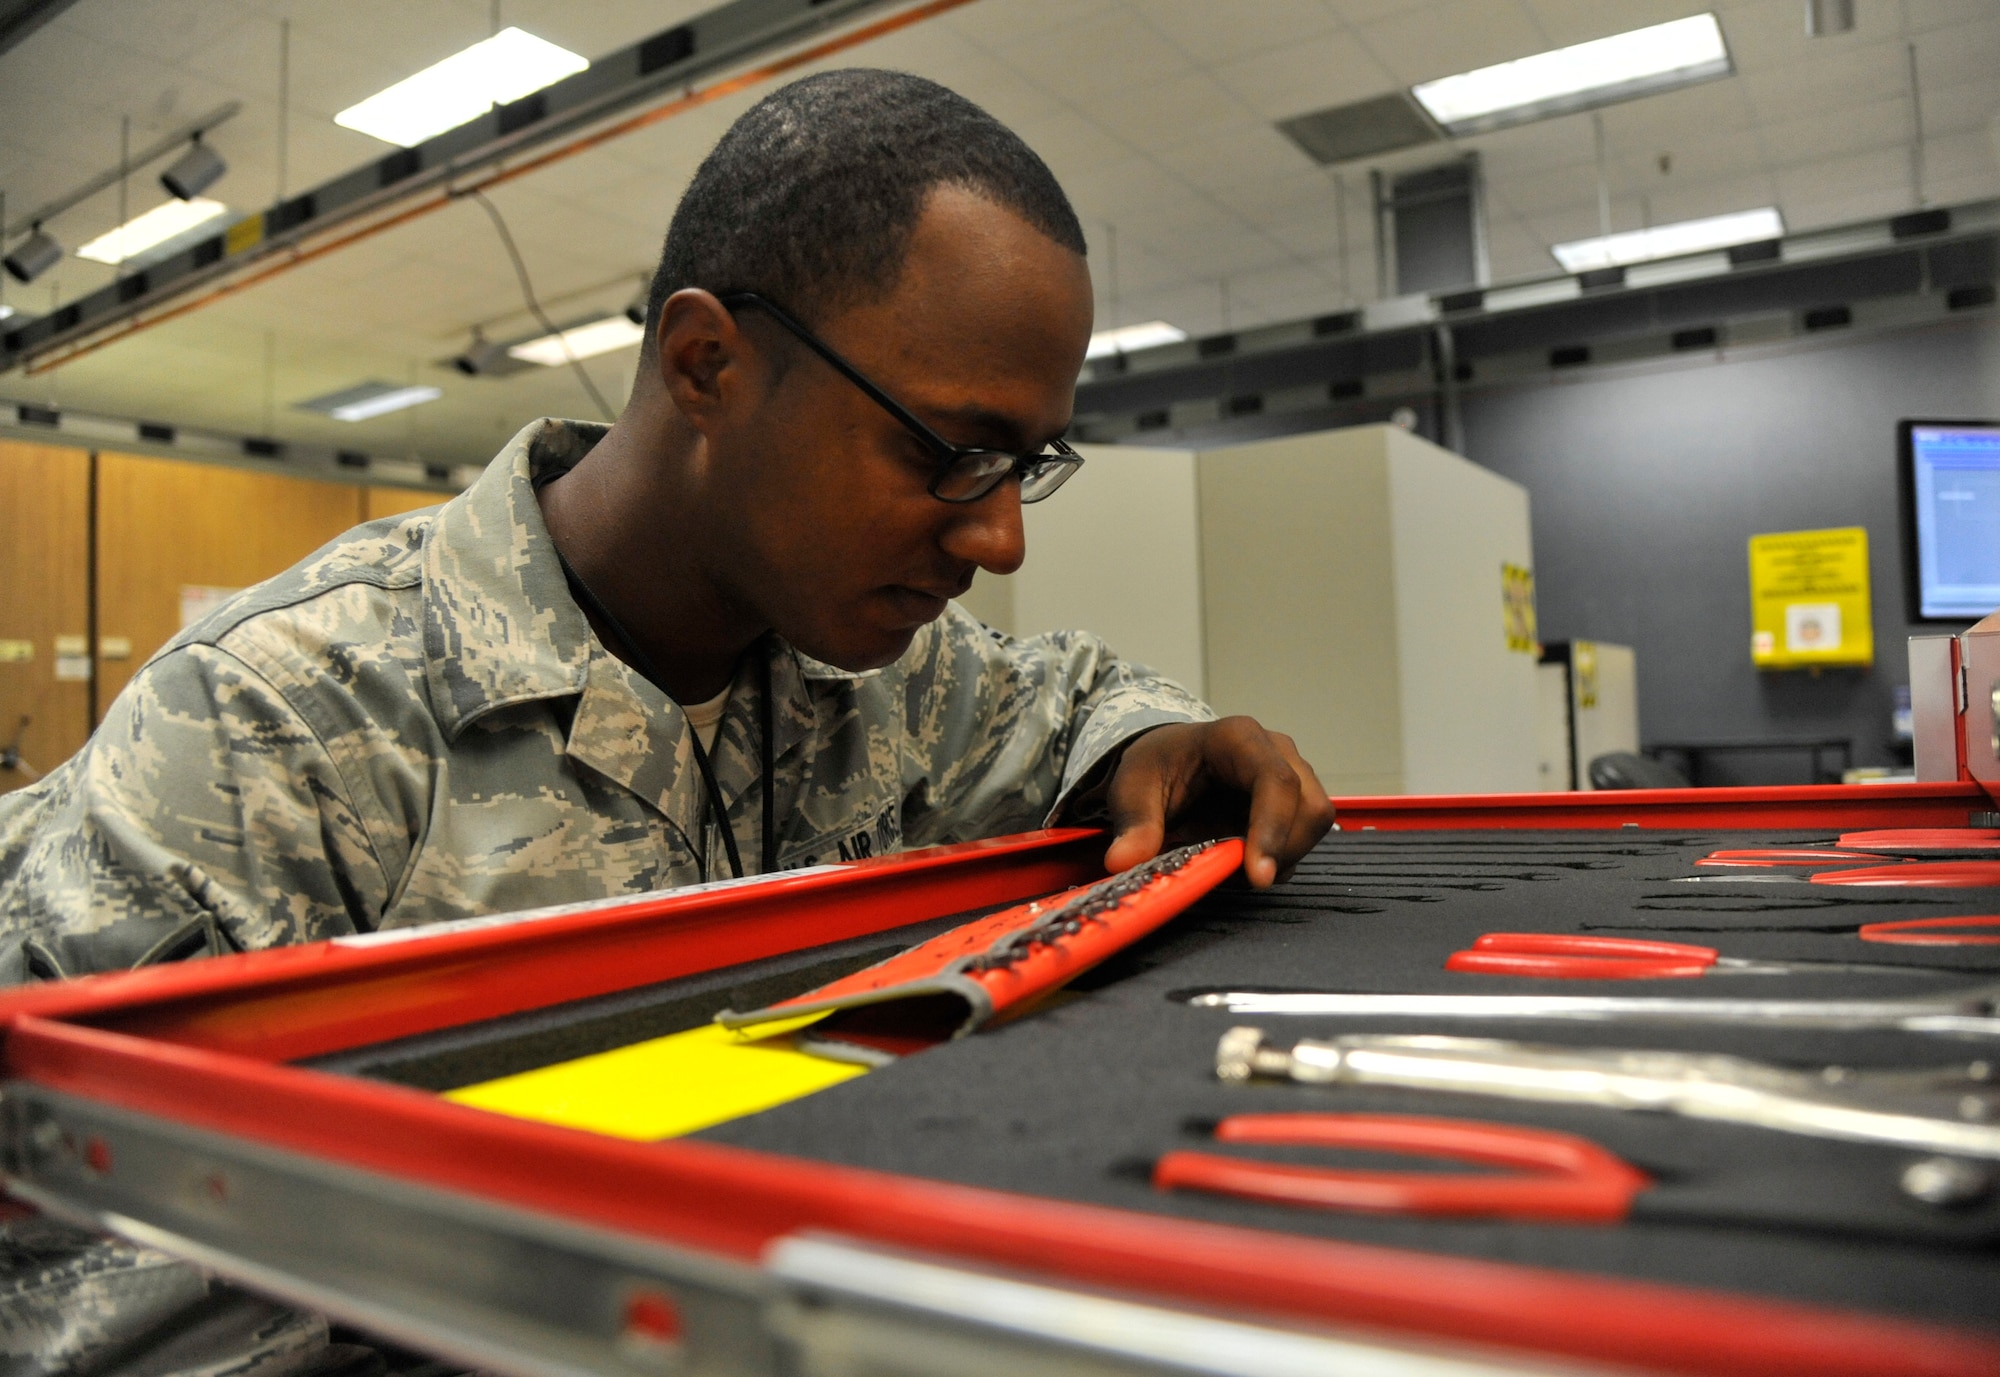 Airman 1st Class Michael Touchette, 509th Maintenance Squadron avionics back shop team member, inspects a tap and die set at Whiteman Air Force Base, Mo., July 25, 2013. The tap and die set must be inspected to ensure there are no damaged or missing tools. These tools are used to rethread screws on line replaceable units and to prevent personality modules threads from stripping. (U.S. Air Force photo by Airman 1st Class Keenan Berry/Released)